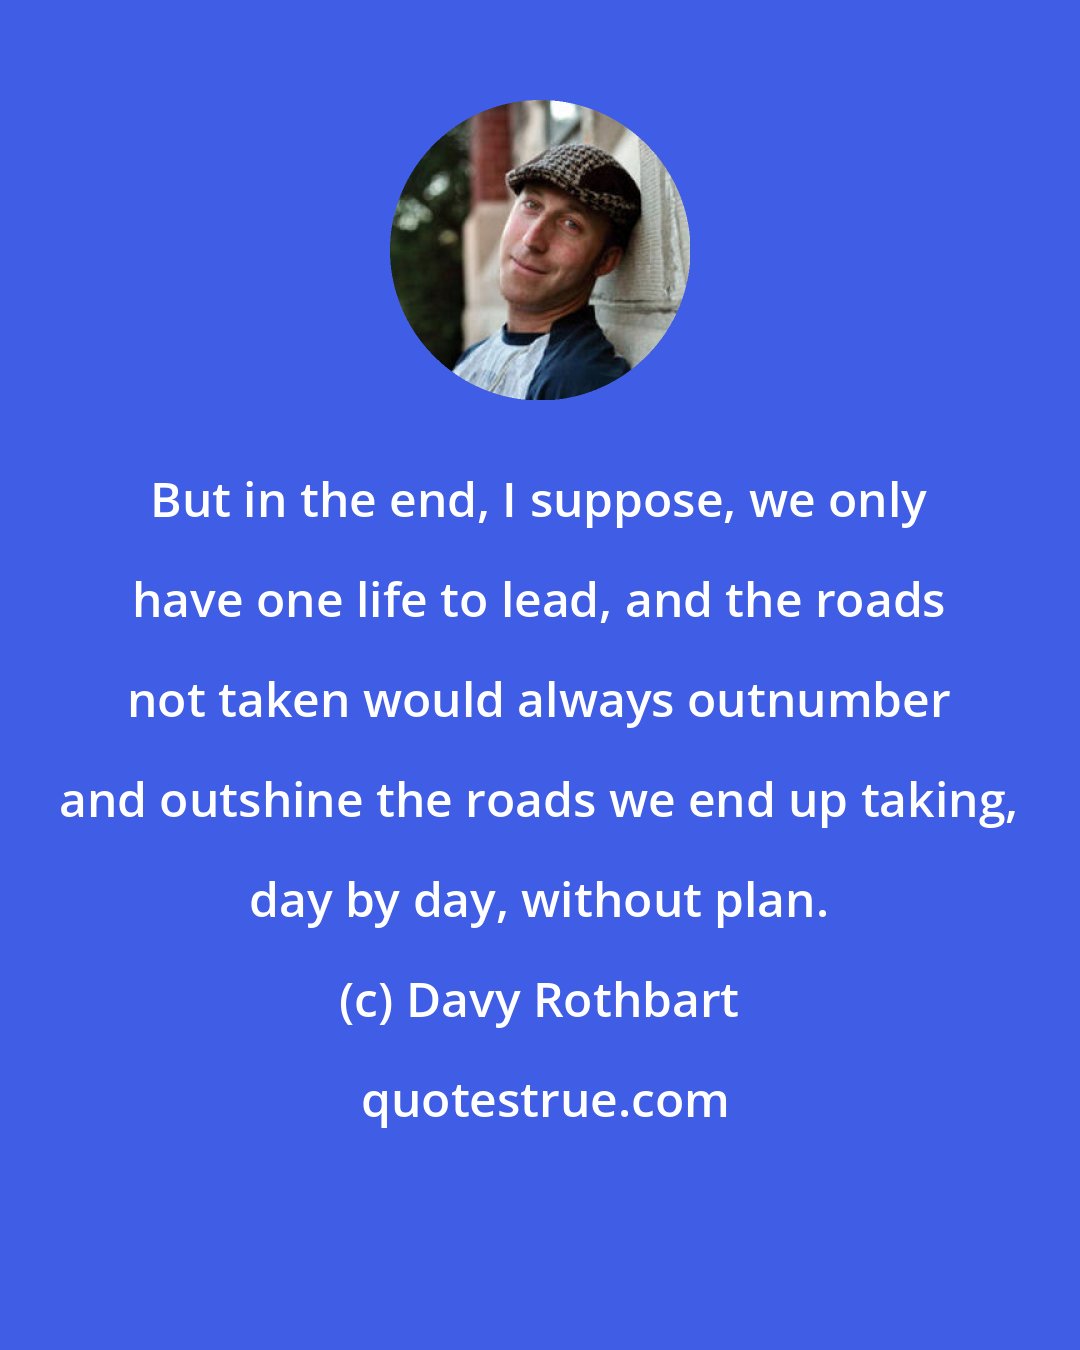 Davy Rothbart: But in the end, I suppose, we only have one life to lead, and the roads not taken would always outnumber and outshine the roads we end up taking, day by day, without plan.